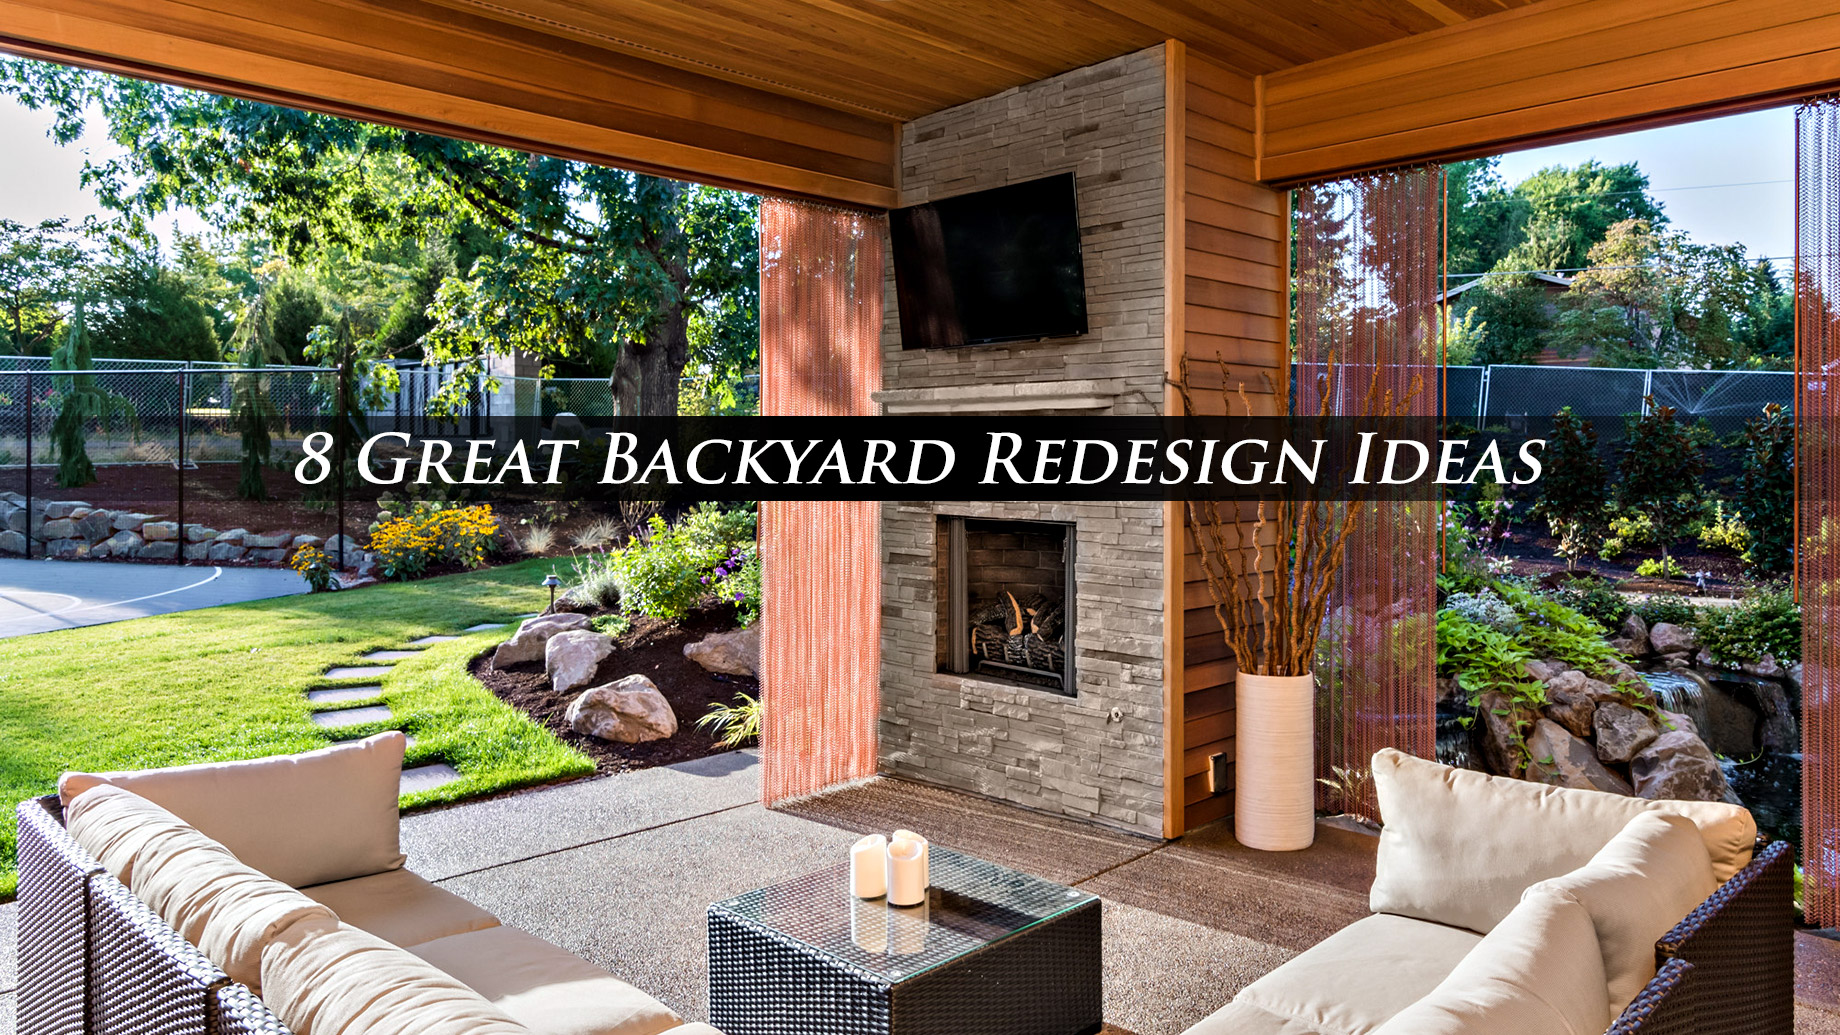 8 Great Backyard Redesign Ideas to Try Out Today